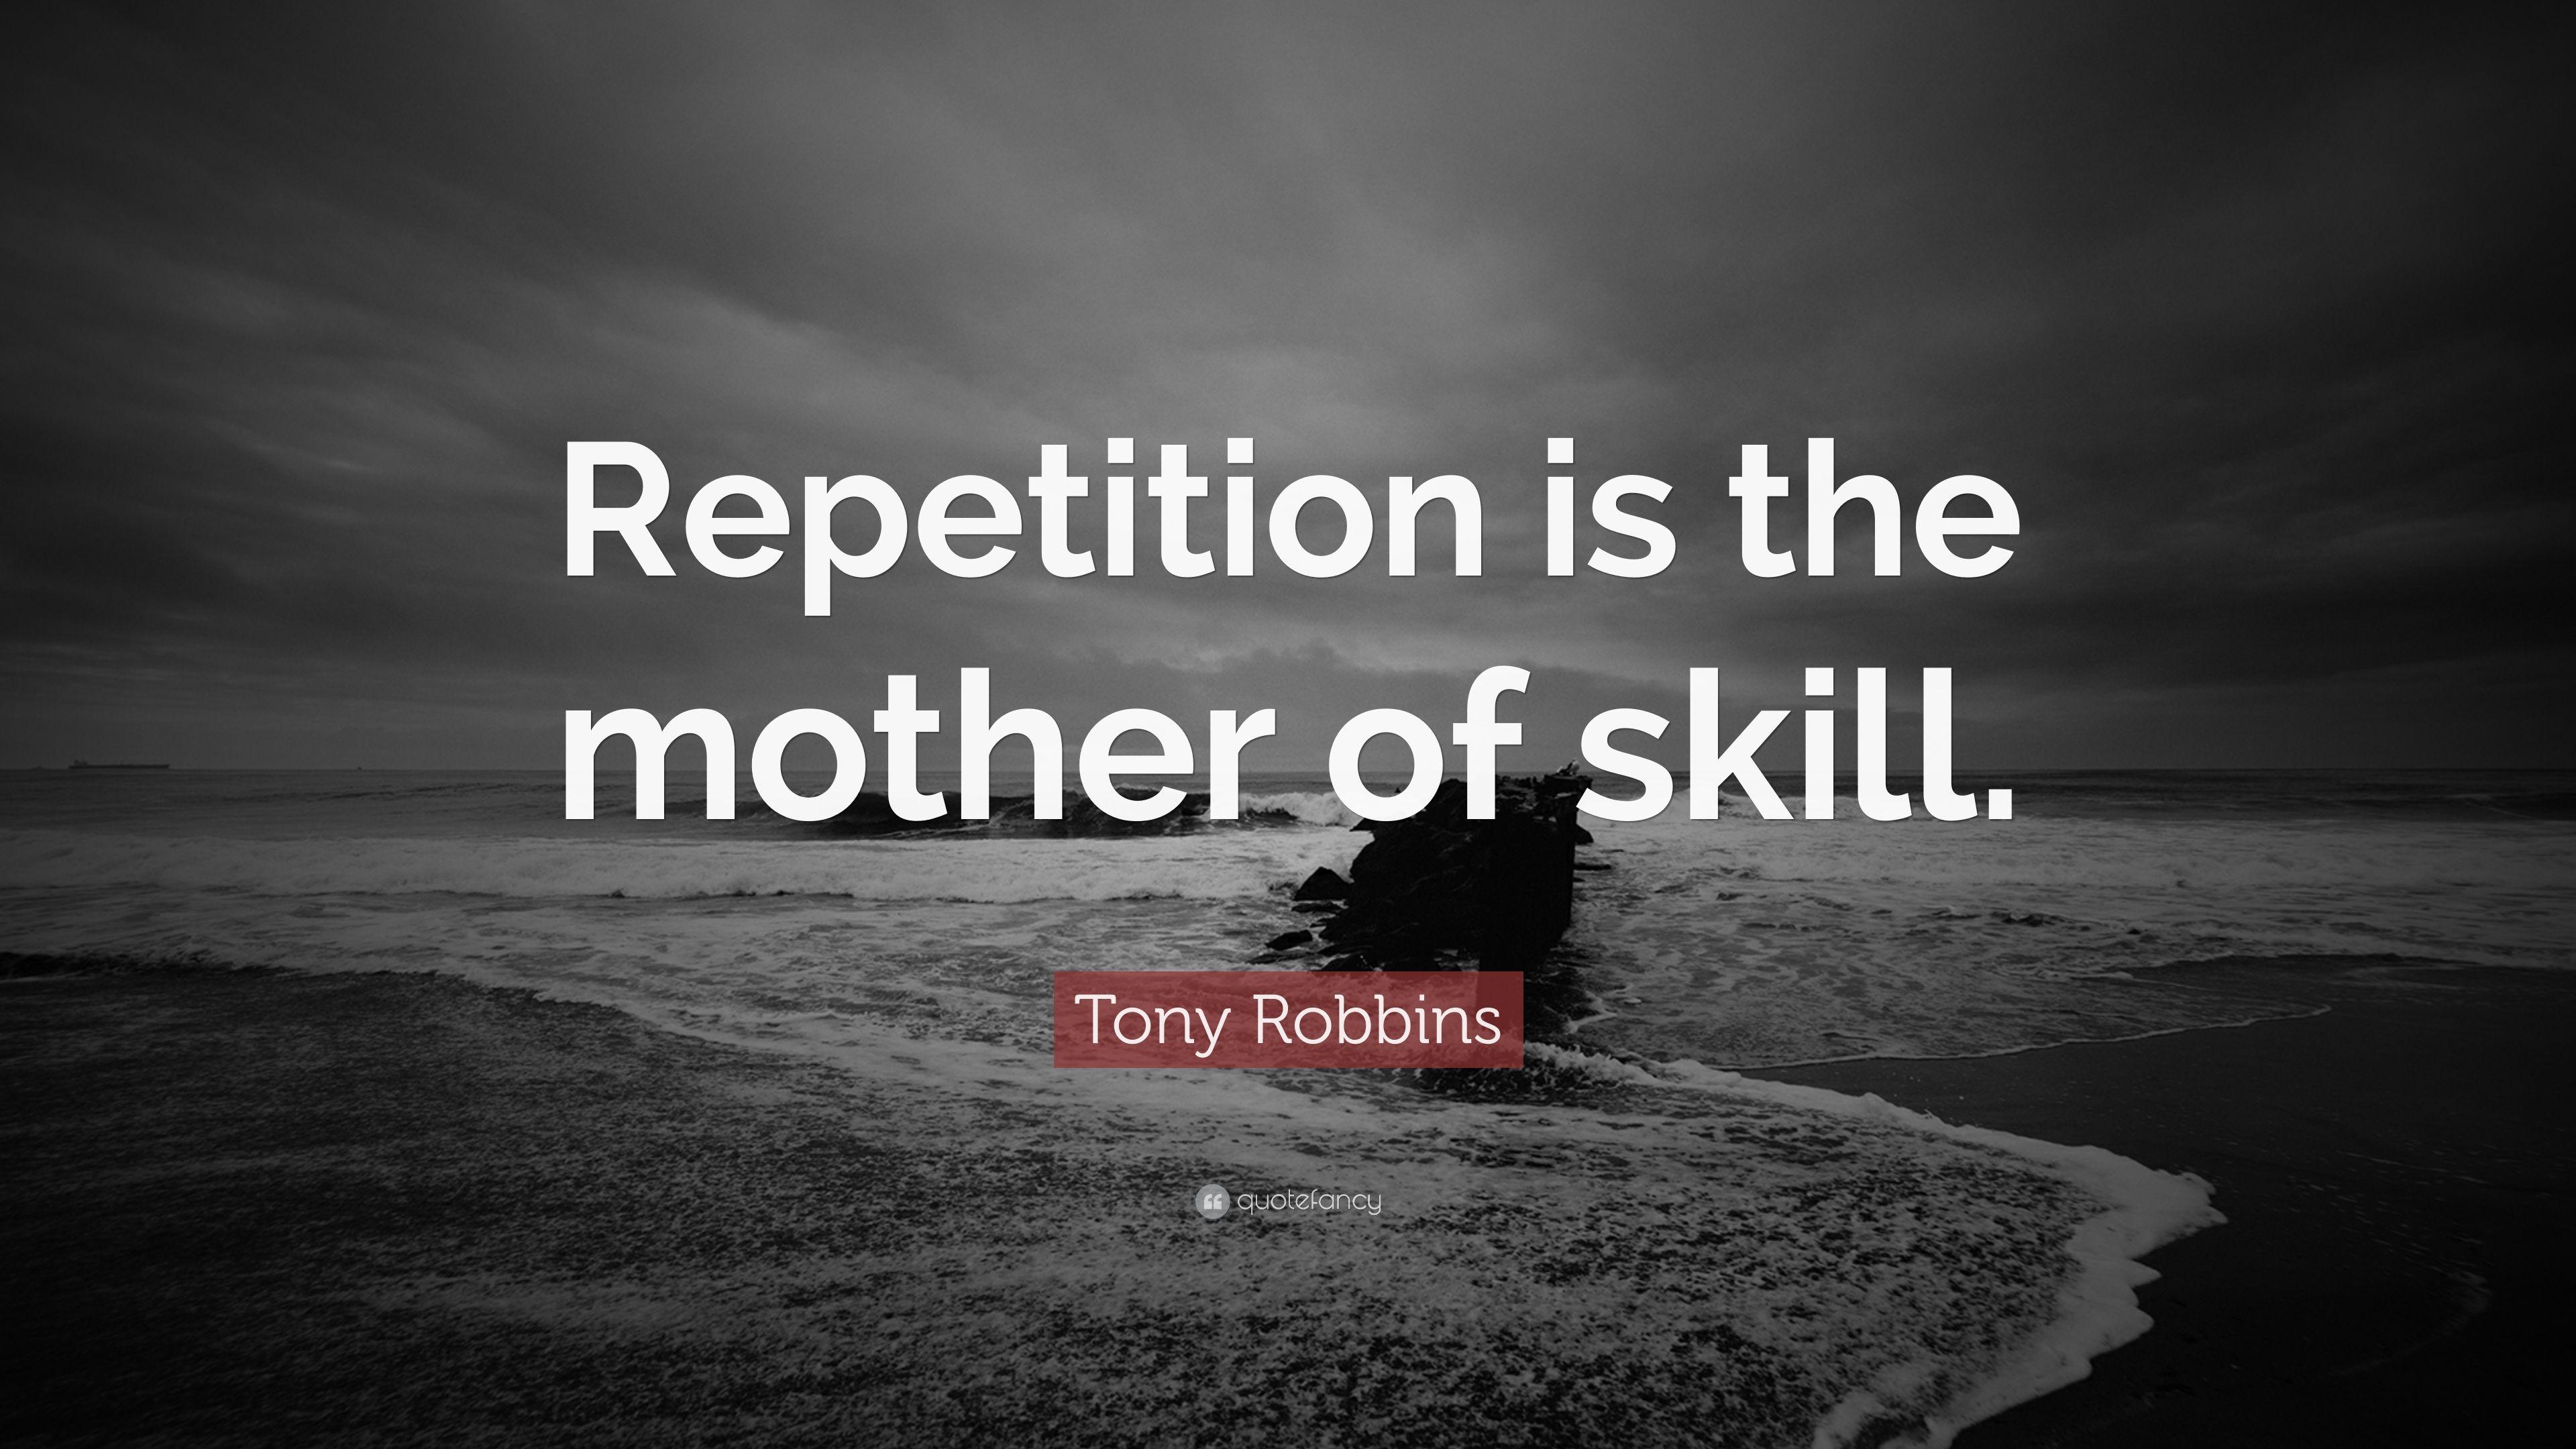 Tony Robbins Quote: “Repetition is the mother of skill.” 12